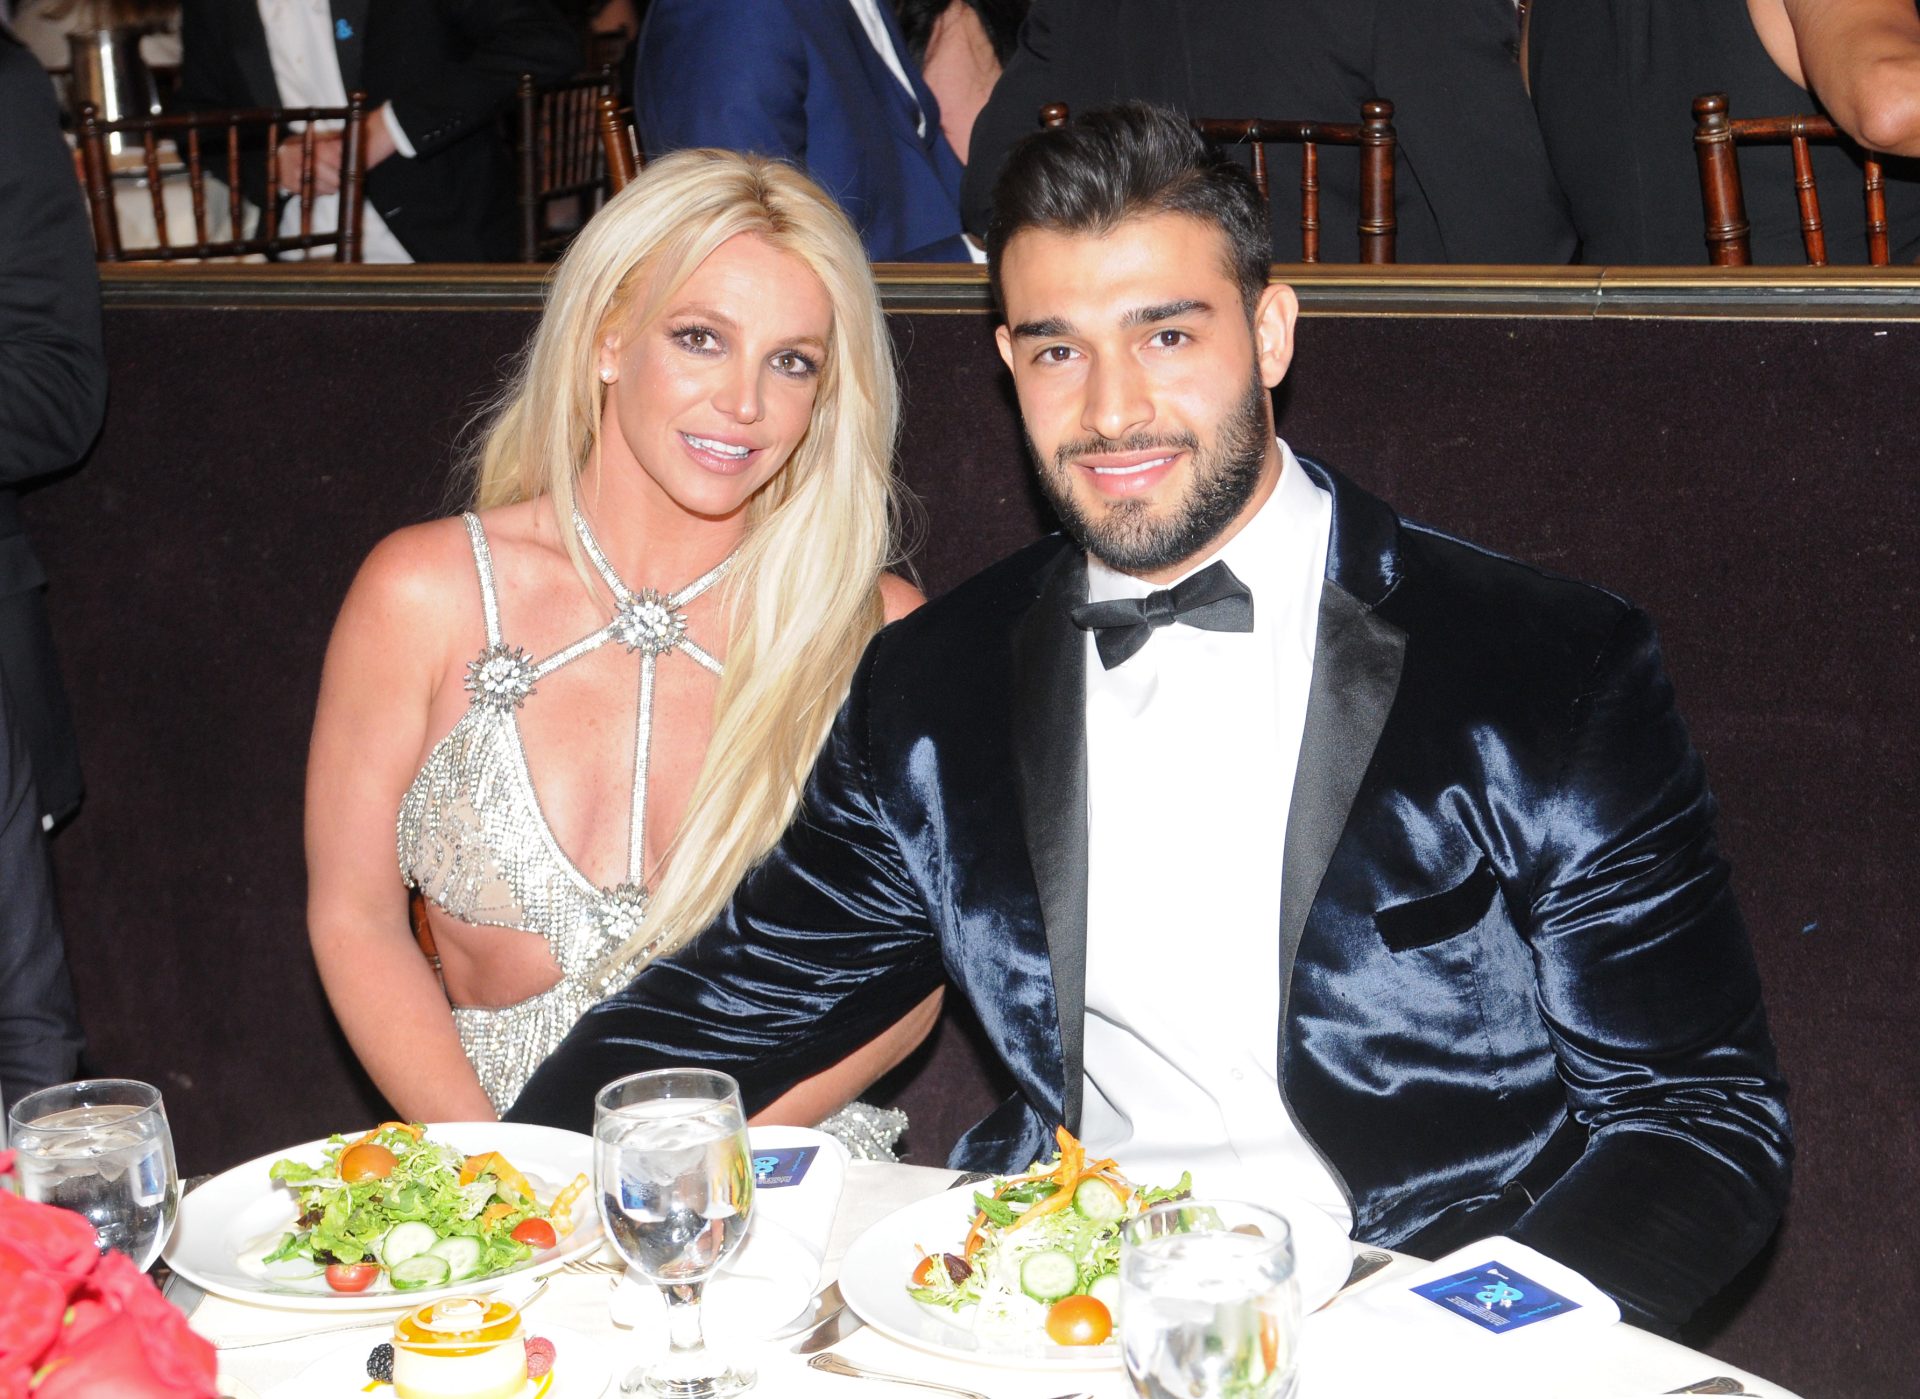 Britney Spears & Sam Asghari Tie The Knot At Spears' Los Angeles Home